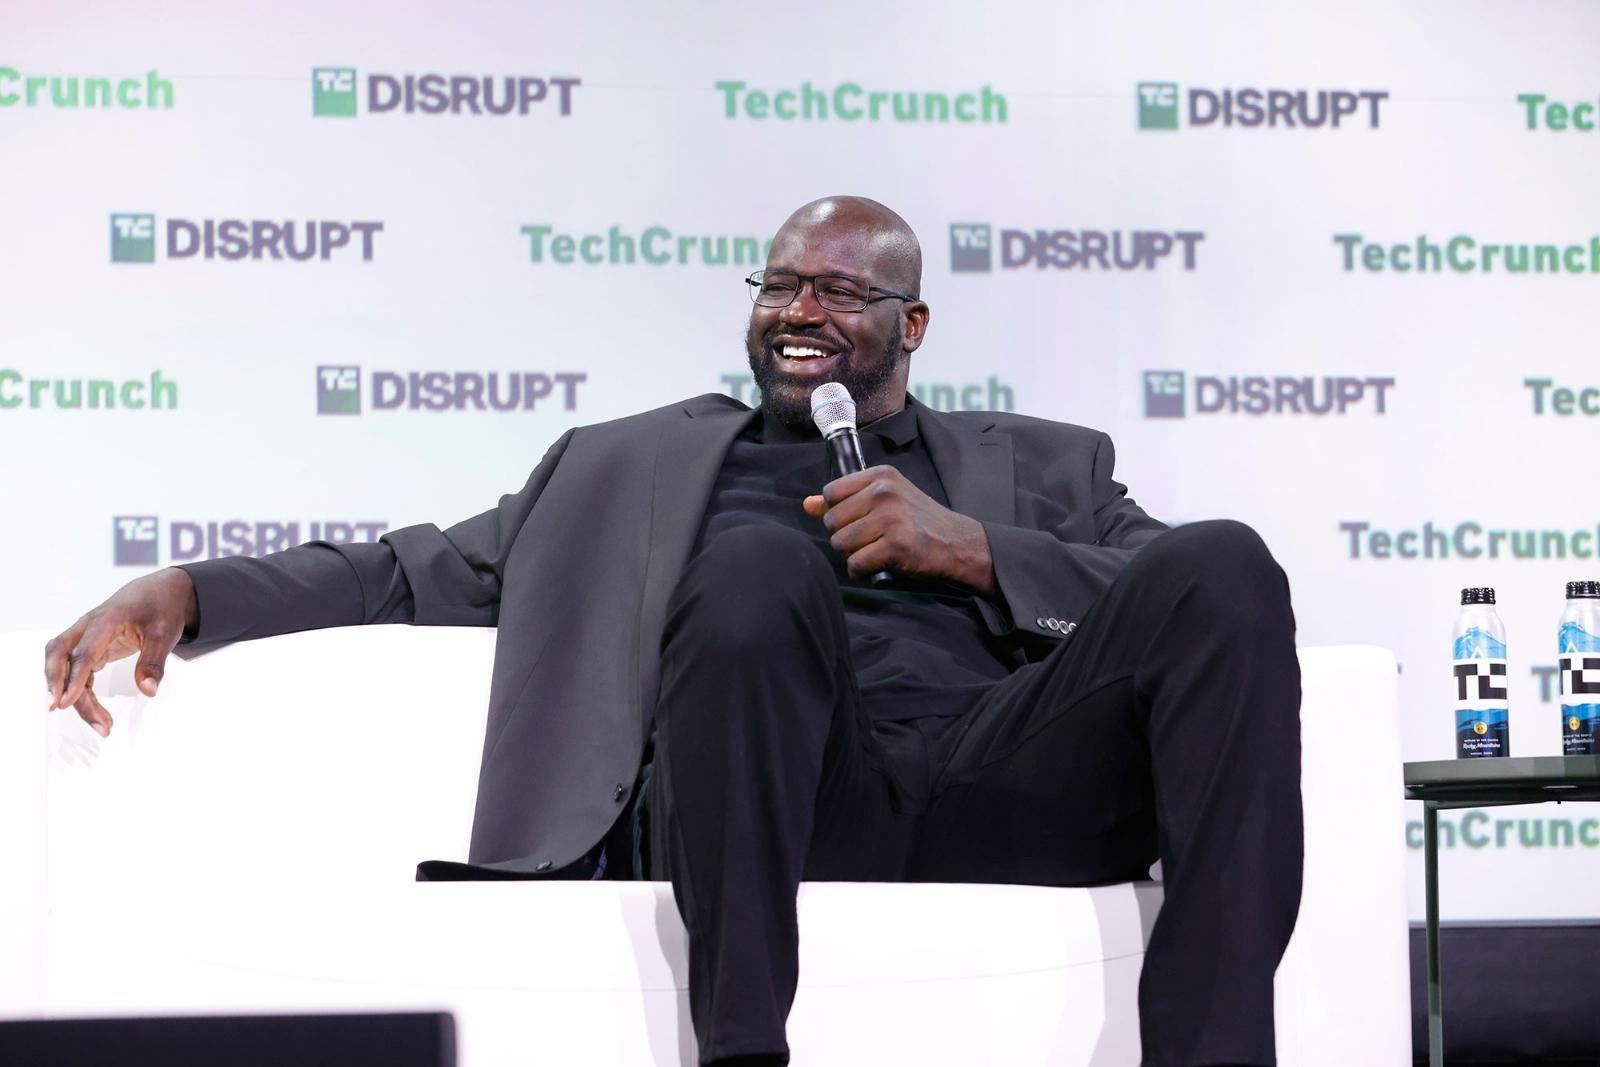 Shaquille O’Neal talks investing in edtech and startups that are going to ‘change people’s lives’